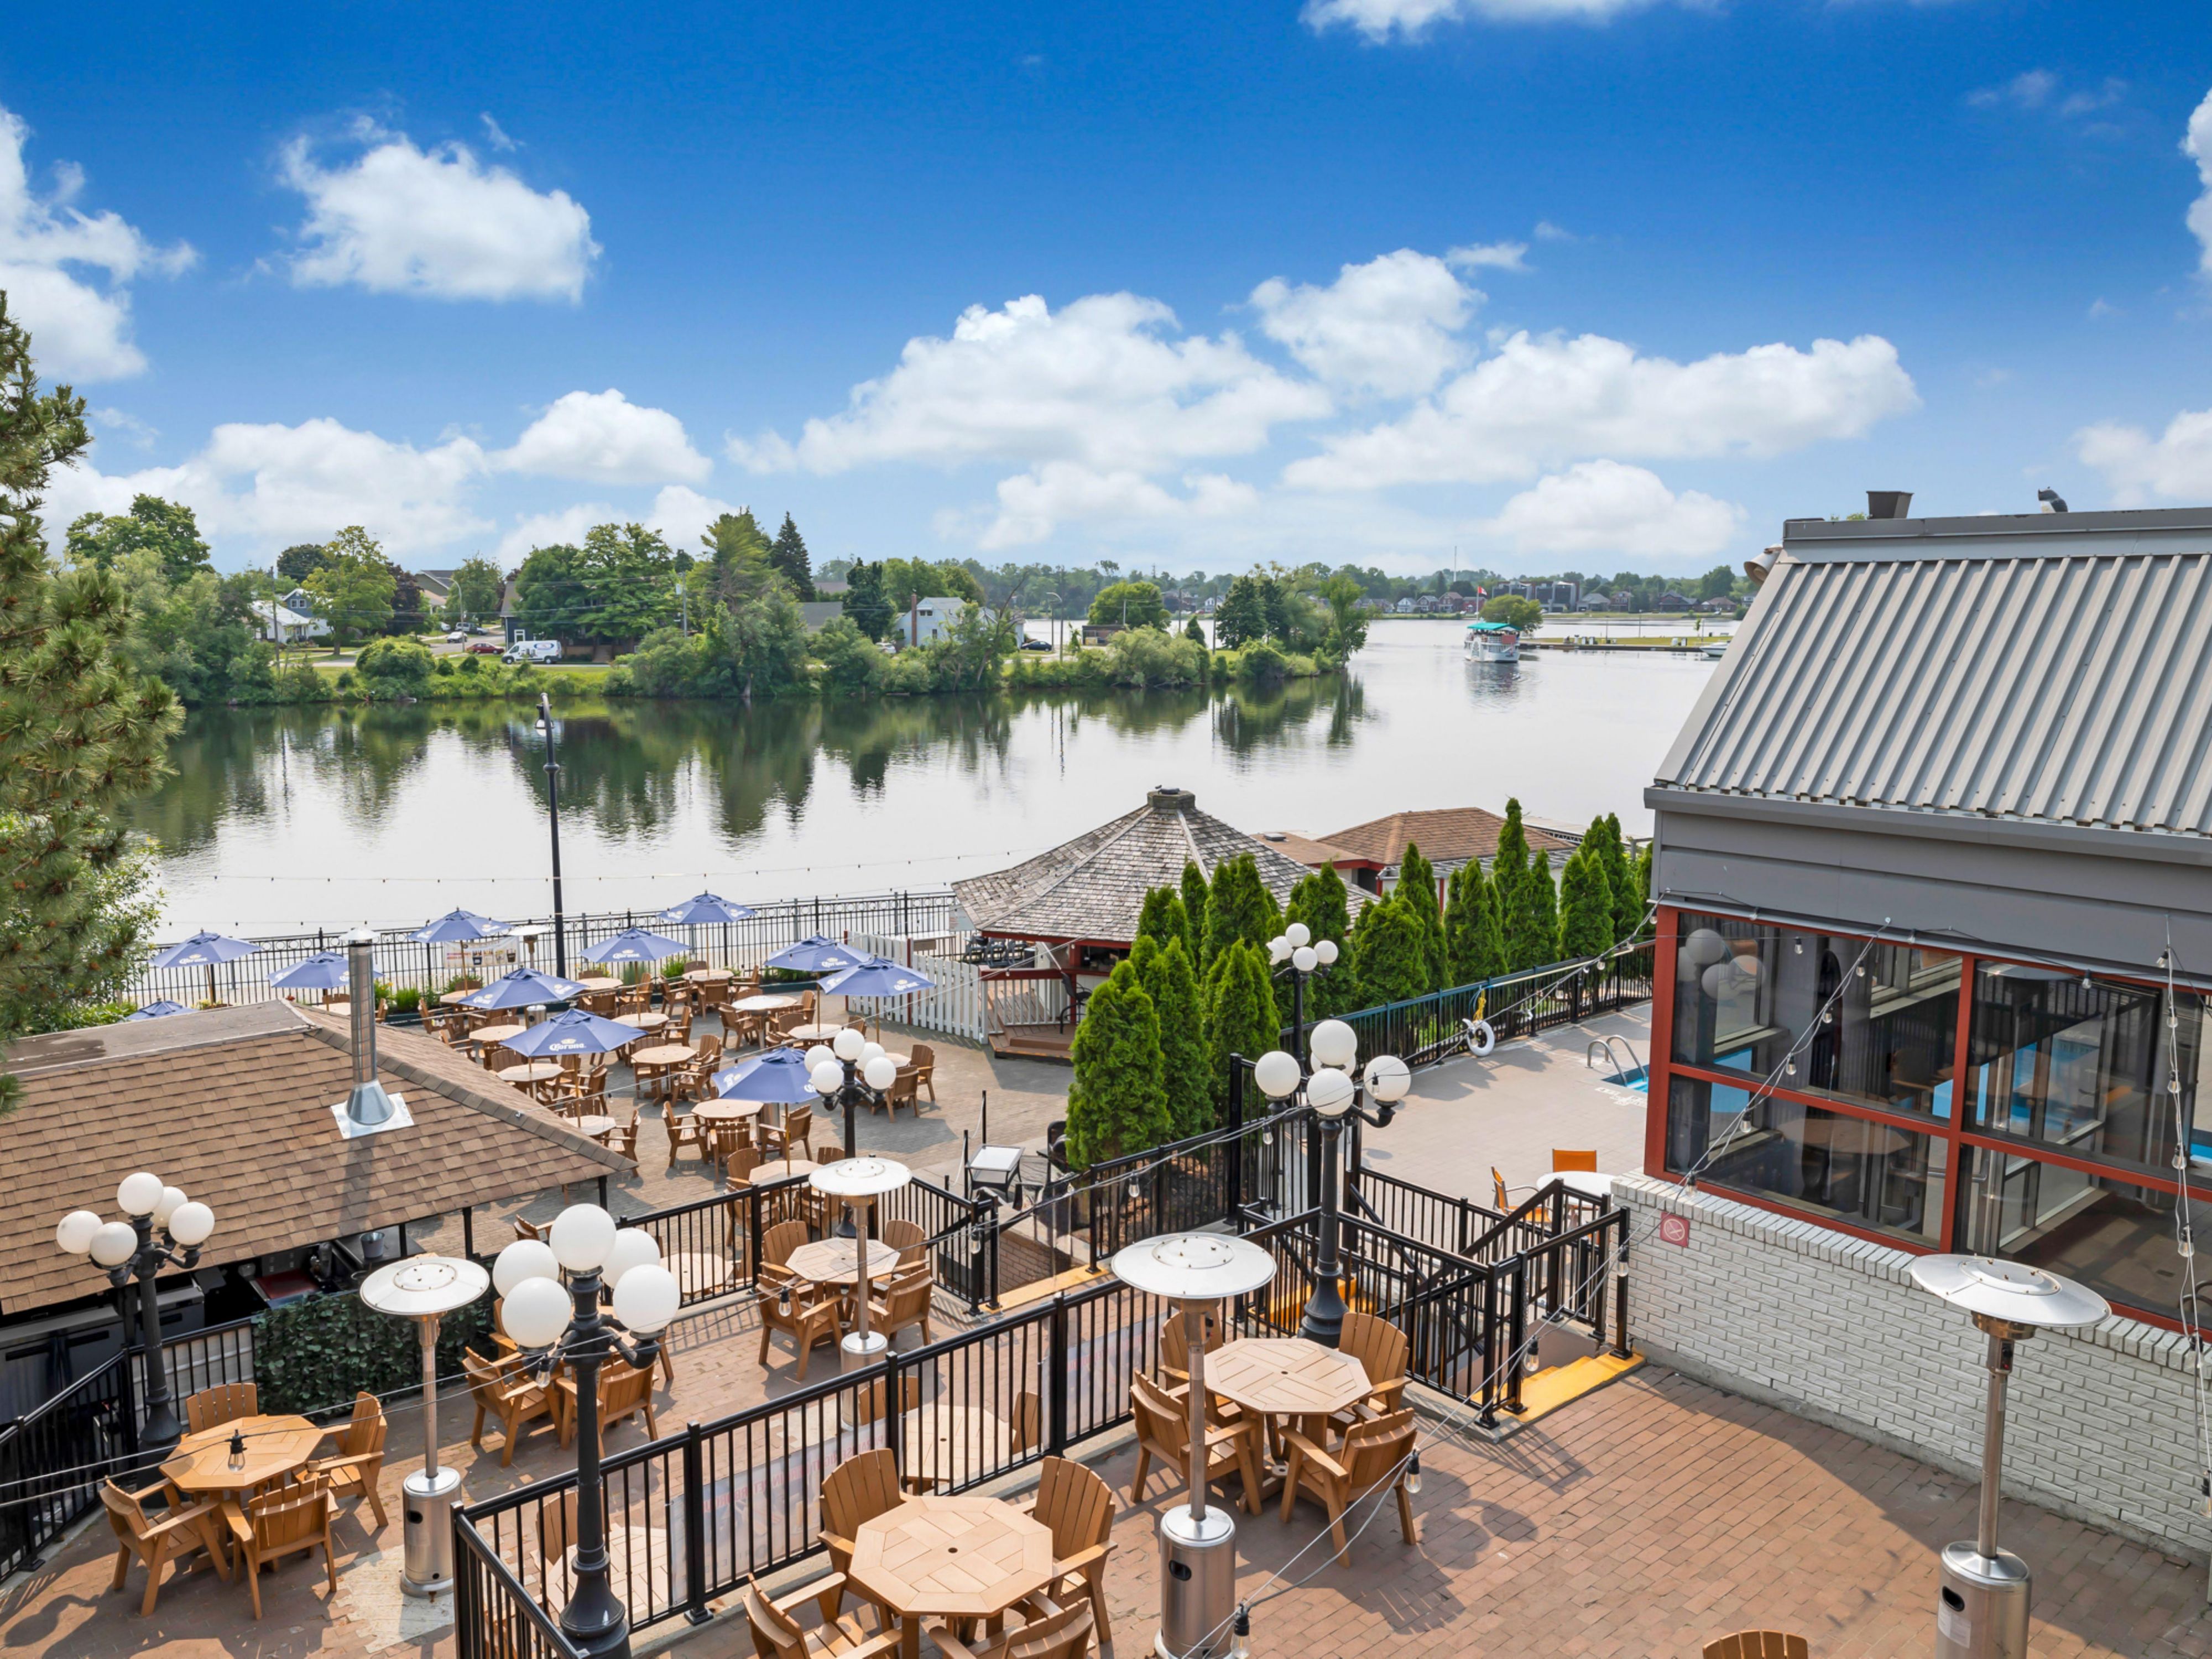 Our outdoor patio is now open for the season. Join us for lunch and dinner and summer full of live entertainment.  
Have you thought about enjoying breakfast outdoors on a warm beautiful morning? Here you can enjoy the top levels of the patio to get your day started off in the right direction.